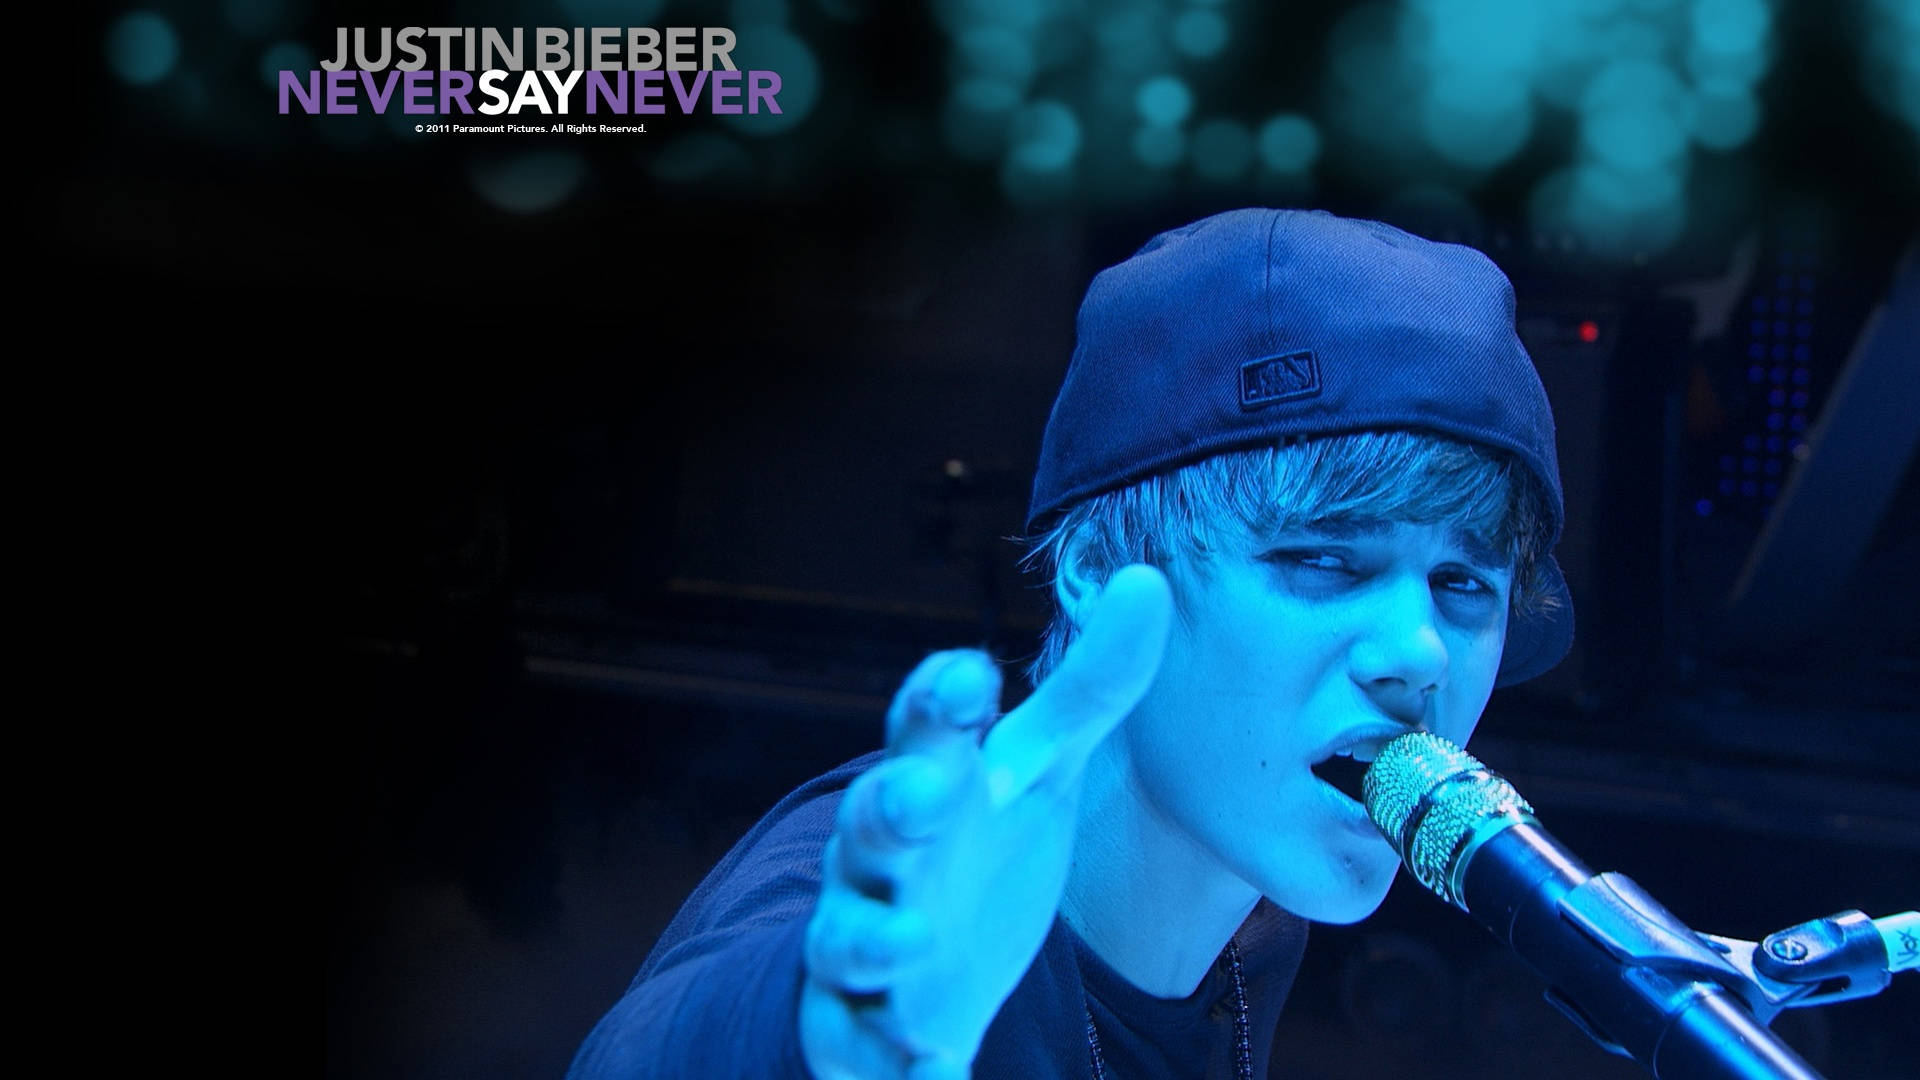 Justin Bieber Performing On Stage Background